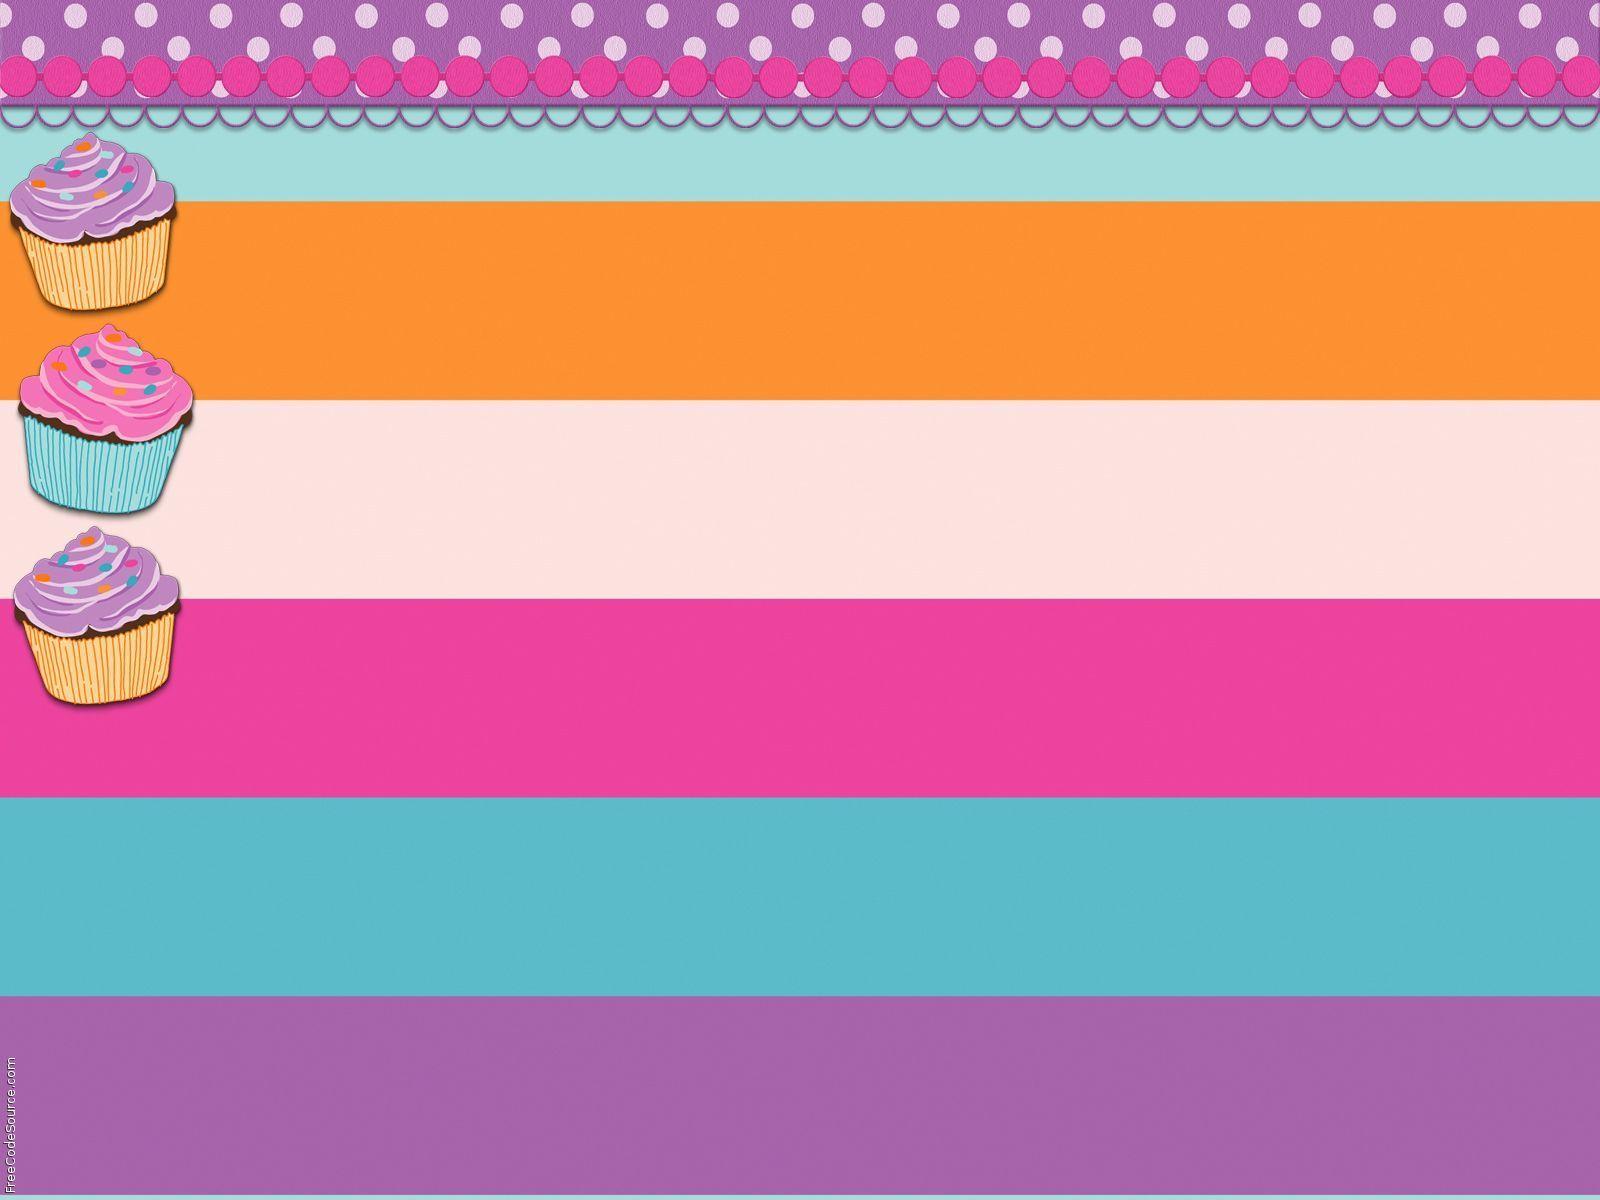 Wallpaper For > Cute Animated Cupcakes Wallpaper